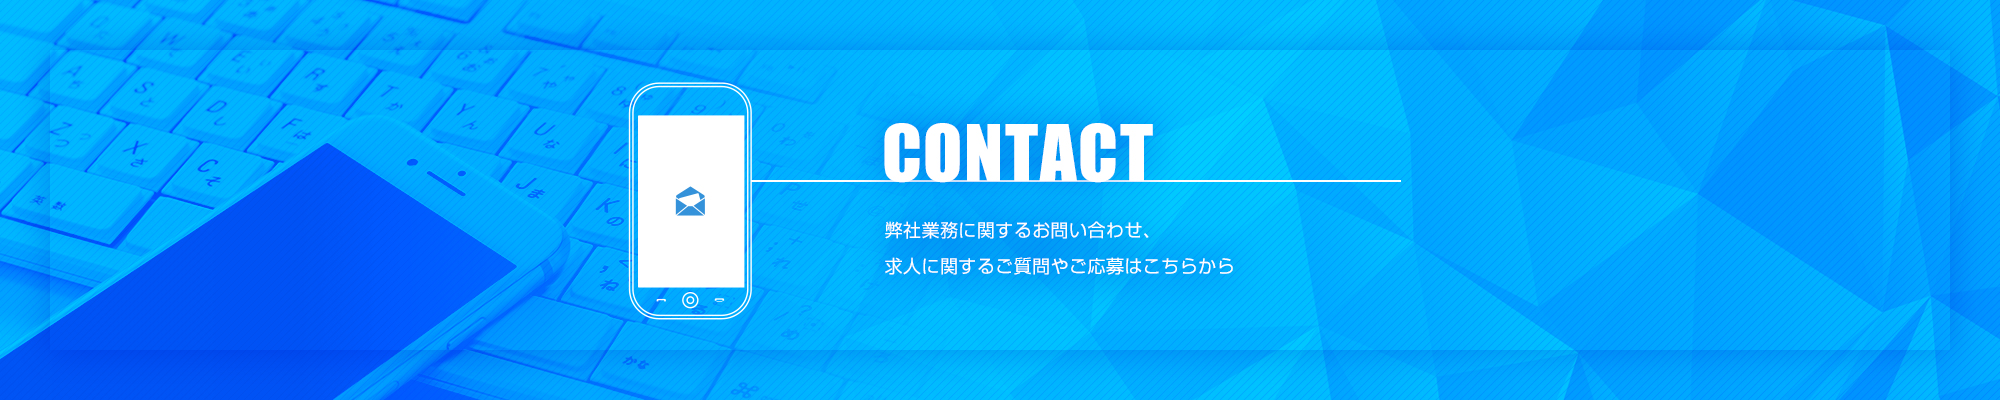 contact_banner_B